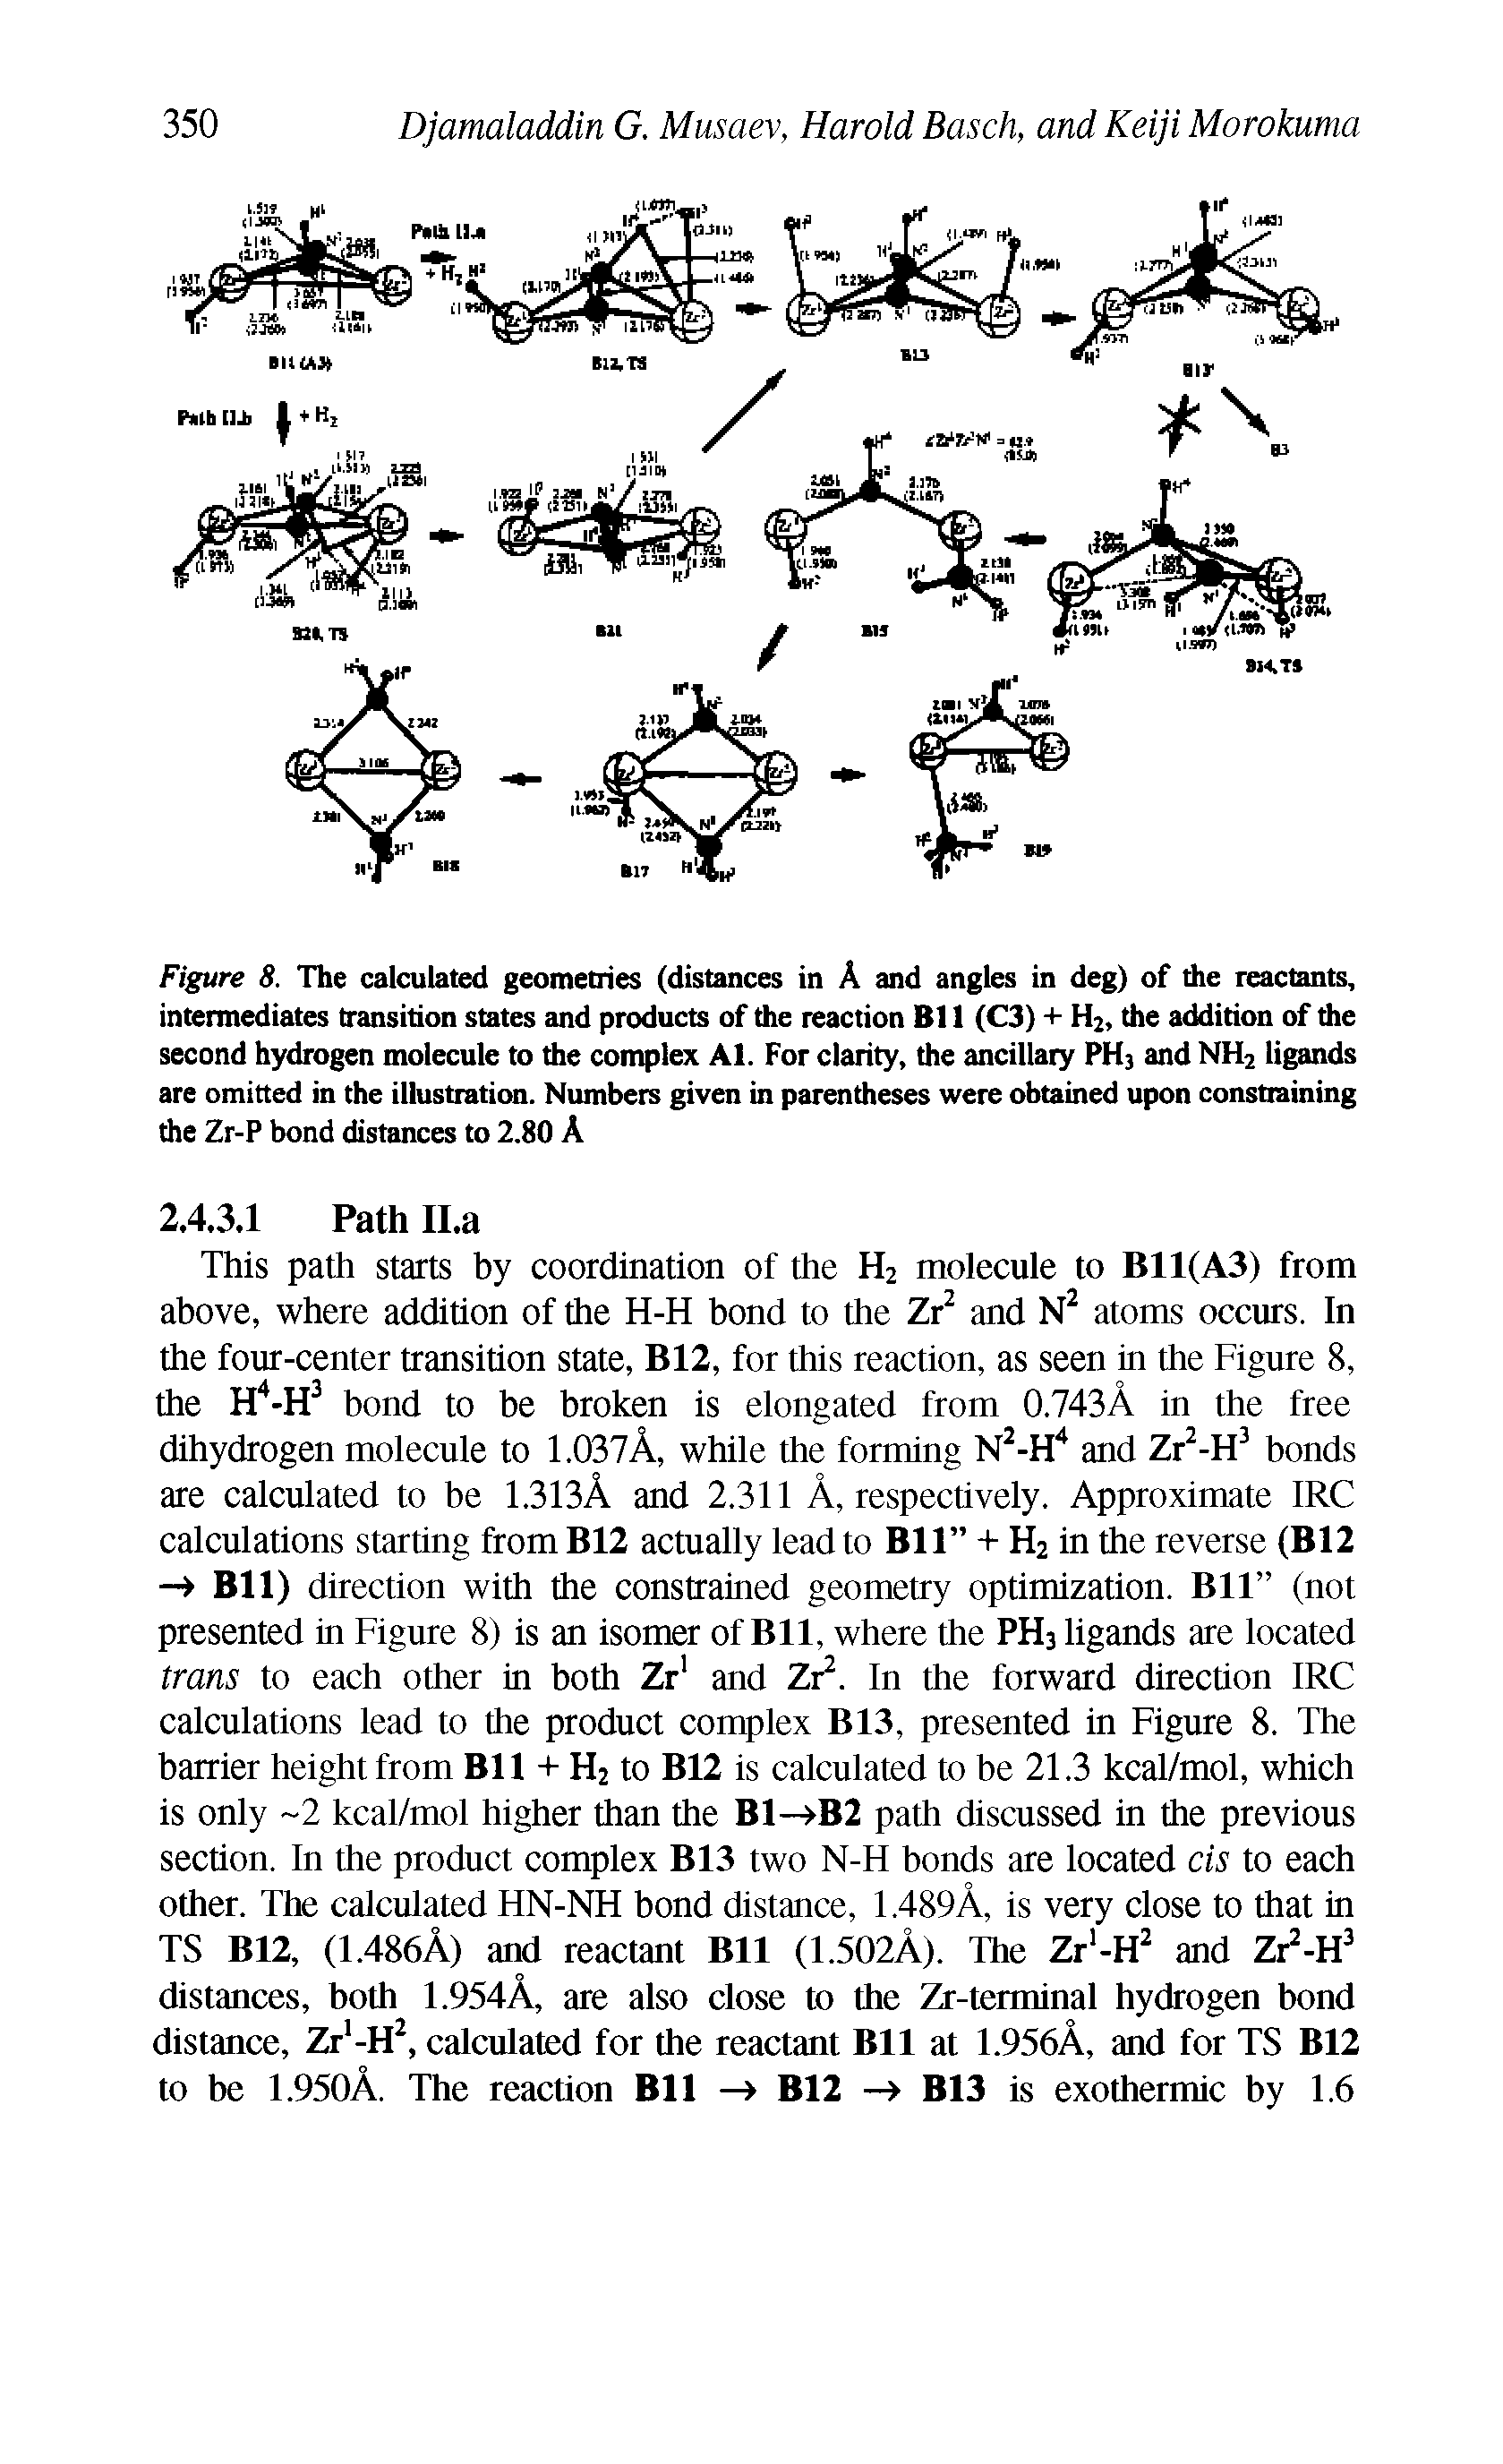 Figure 8. The calculated geometries (distances in A and angles in deg) of the reactants, intermediates transition states and products of the reaction B11 (C3) + H2, the addition of the second hydrogen molecule to the complex Al. For clarity, the ancillary PH3 and NH2 ligands are omitted in the illustration. Numbers given in parentheses were obtained upon constraining the Zr-P bond distances to 2.80 A...